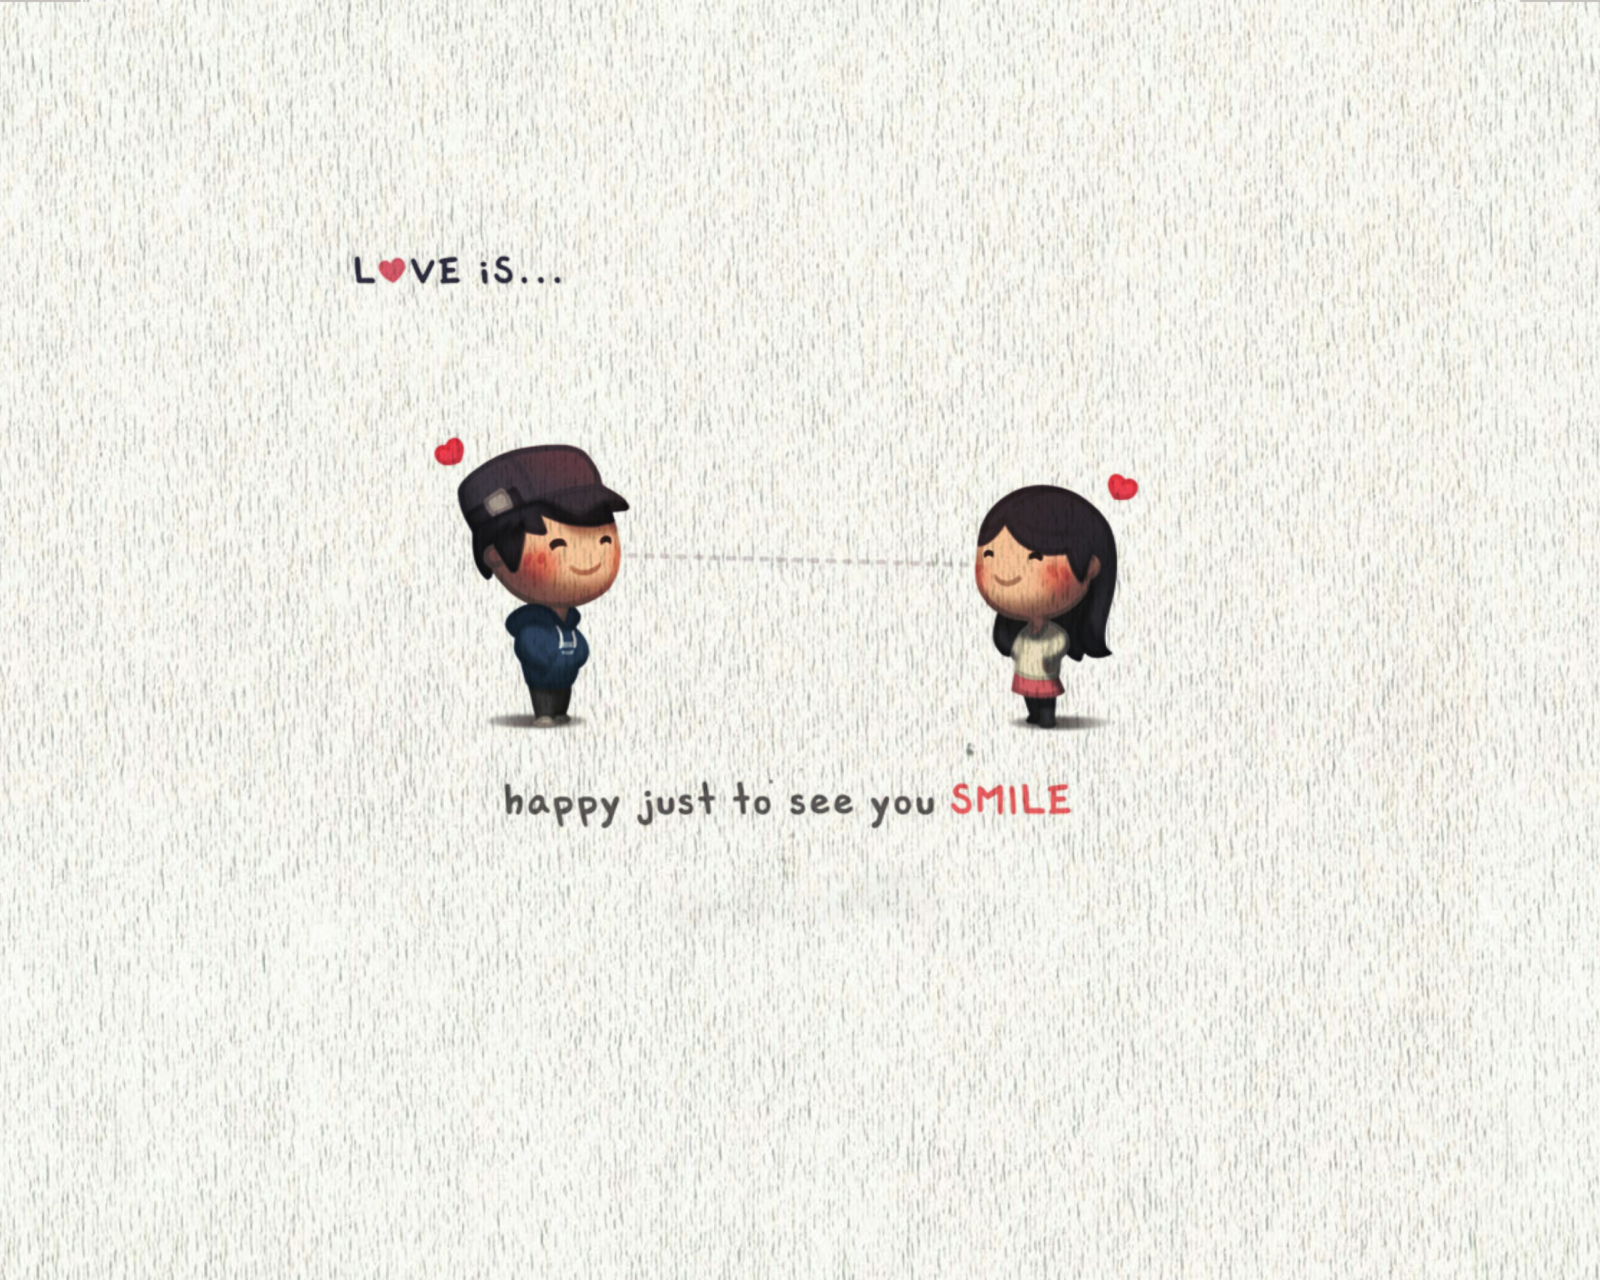 Das Love Is Happy Just To See You Smile Wallpaper 1600x1280